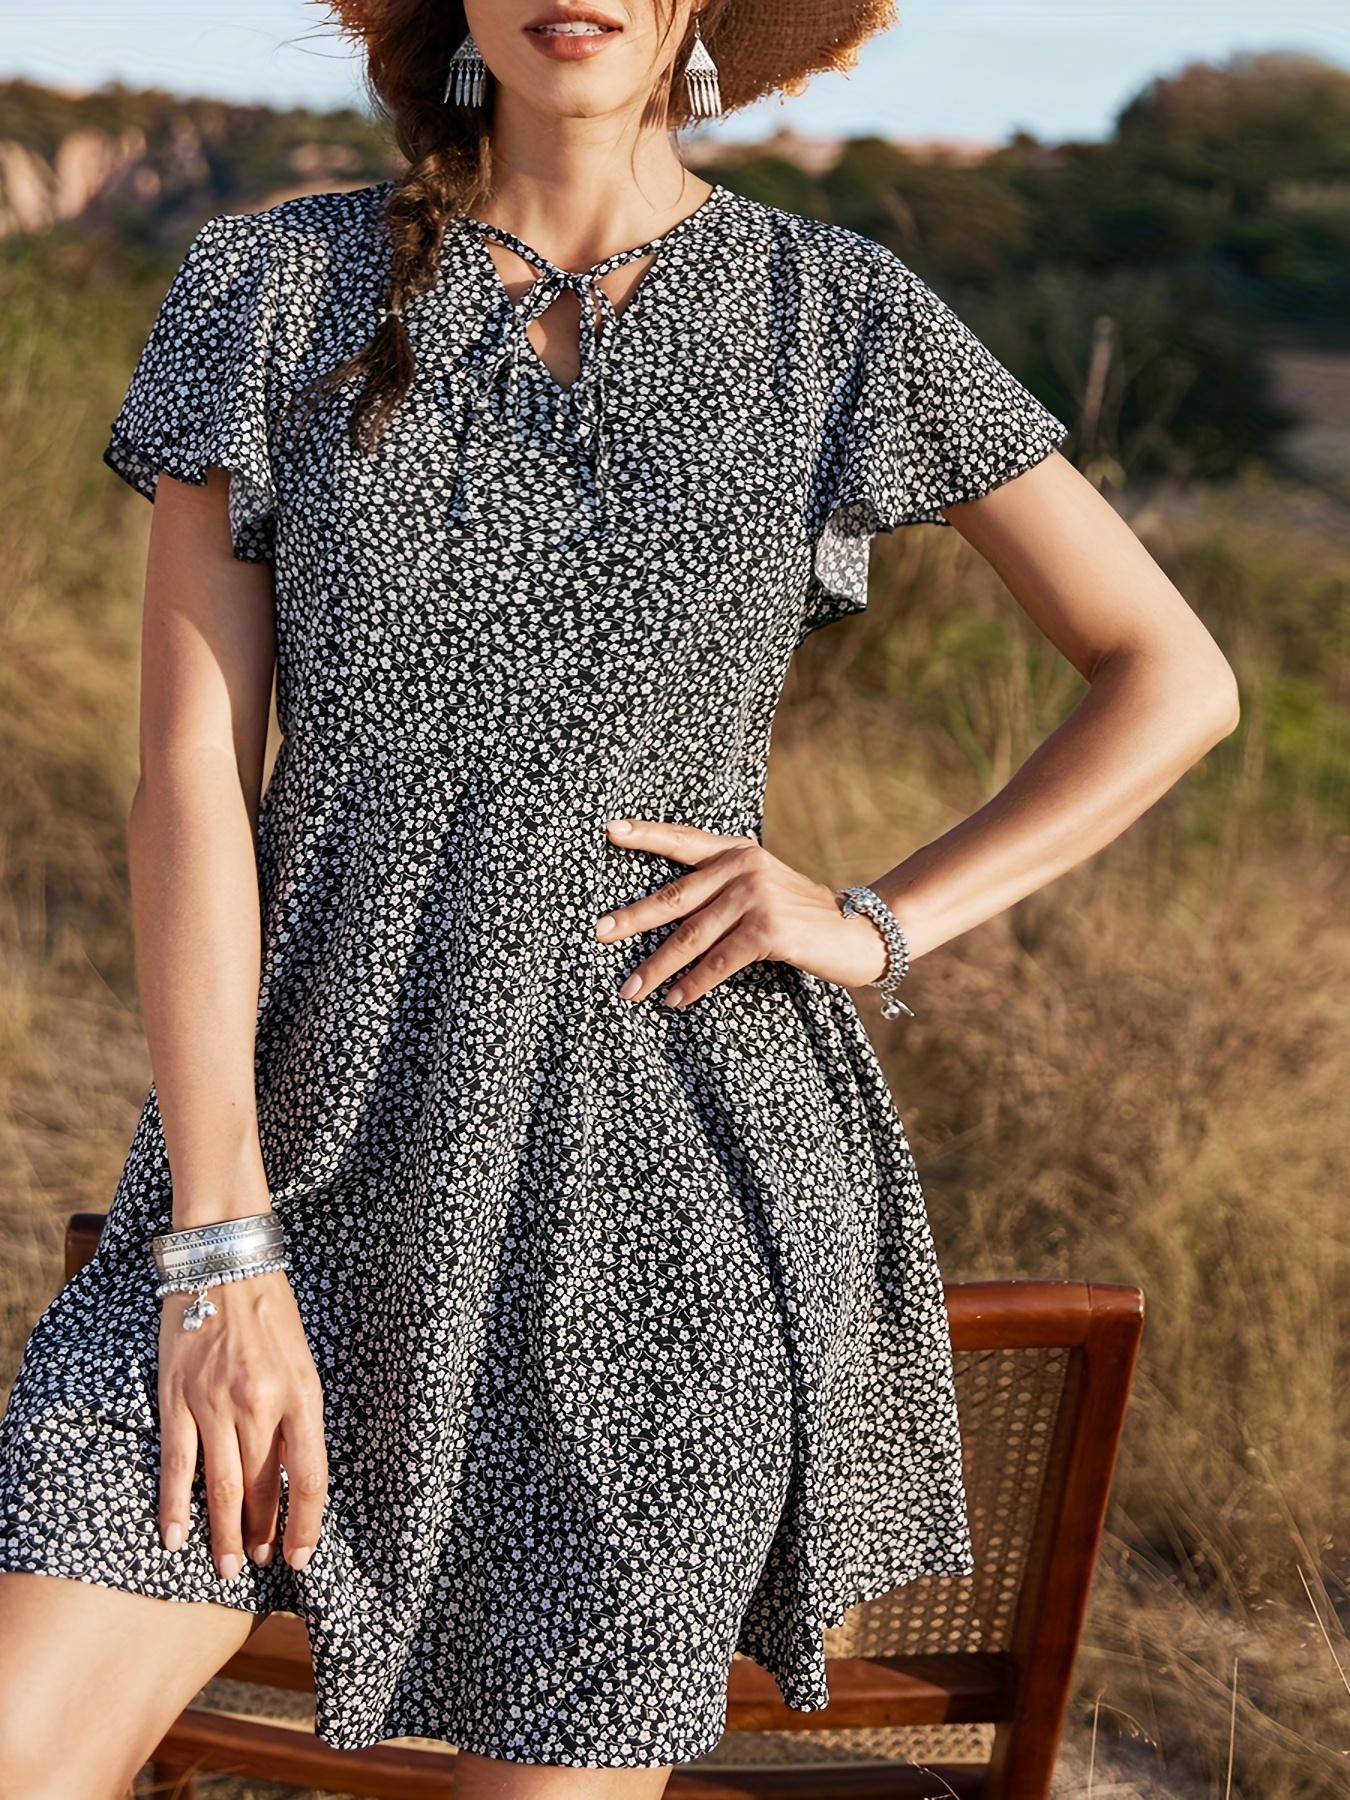 Buy Polka Dot Print Wrap Dress with Flutter Sleeves and Tie-Ups